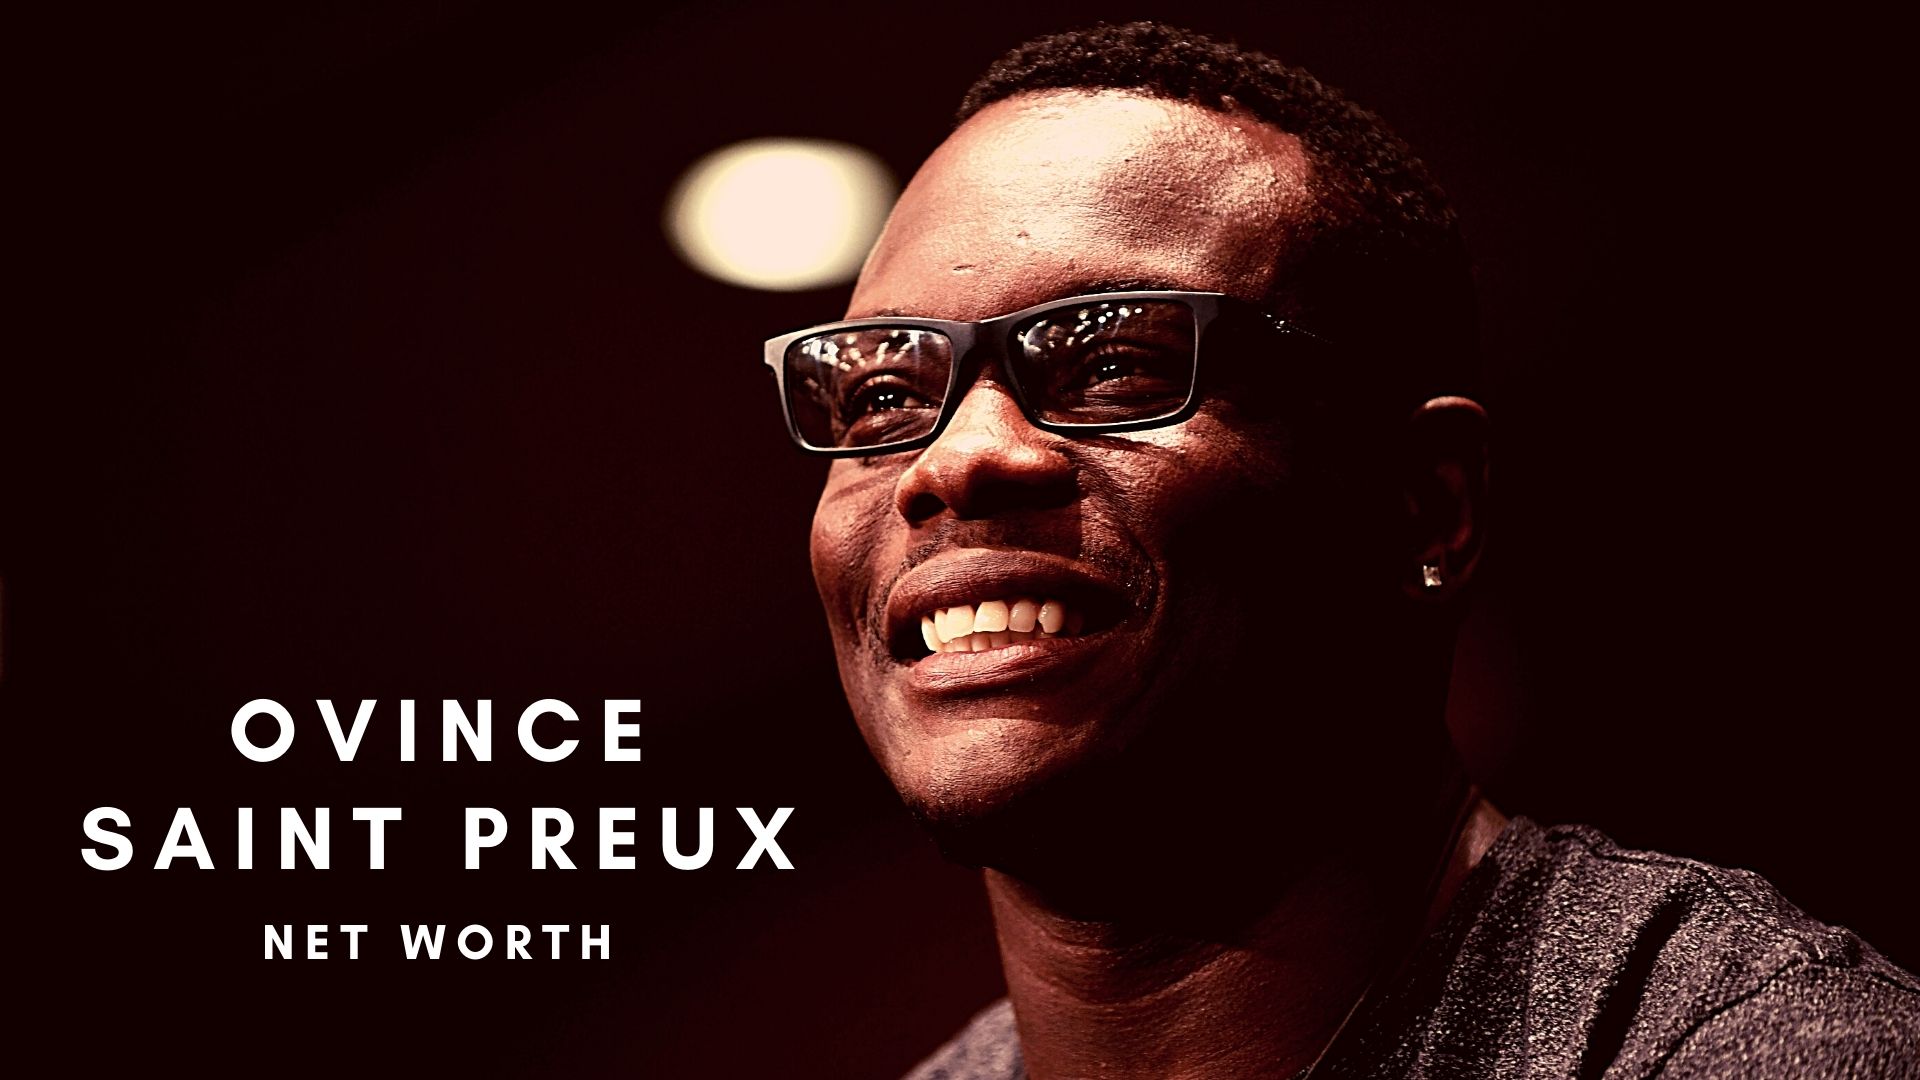 Ovince Saint Preux has made a huge net worth thanks to his MMA career